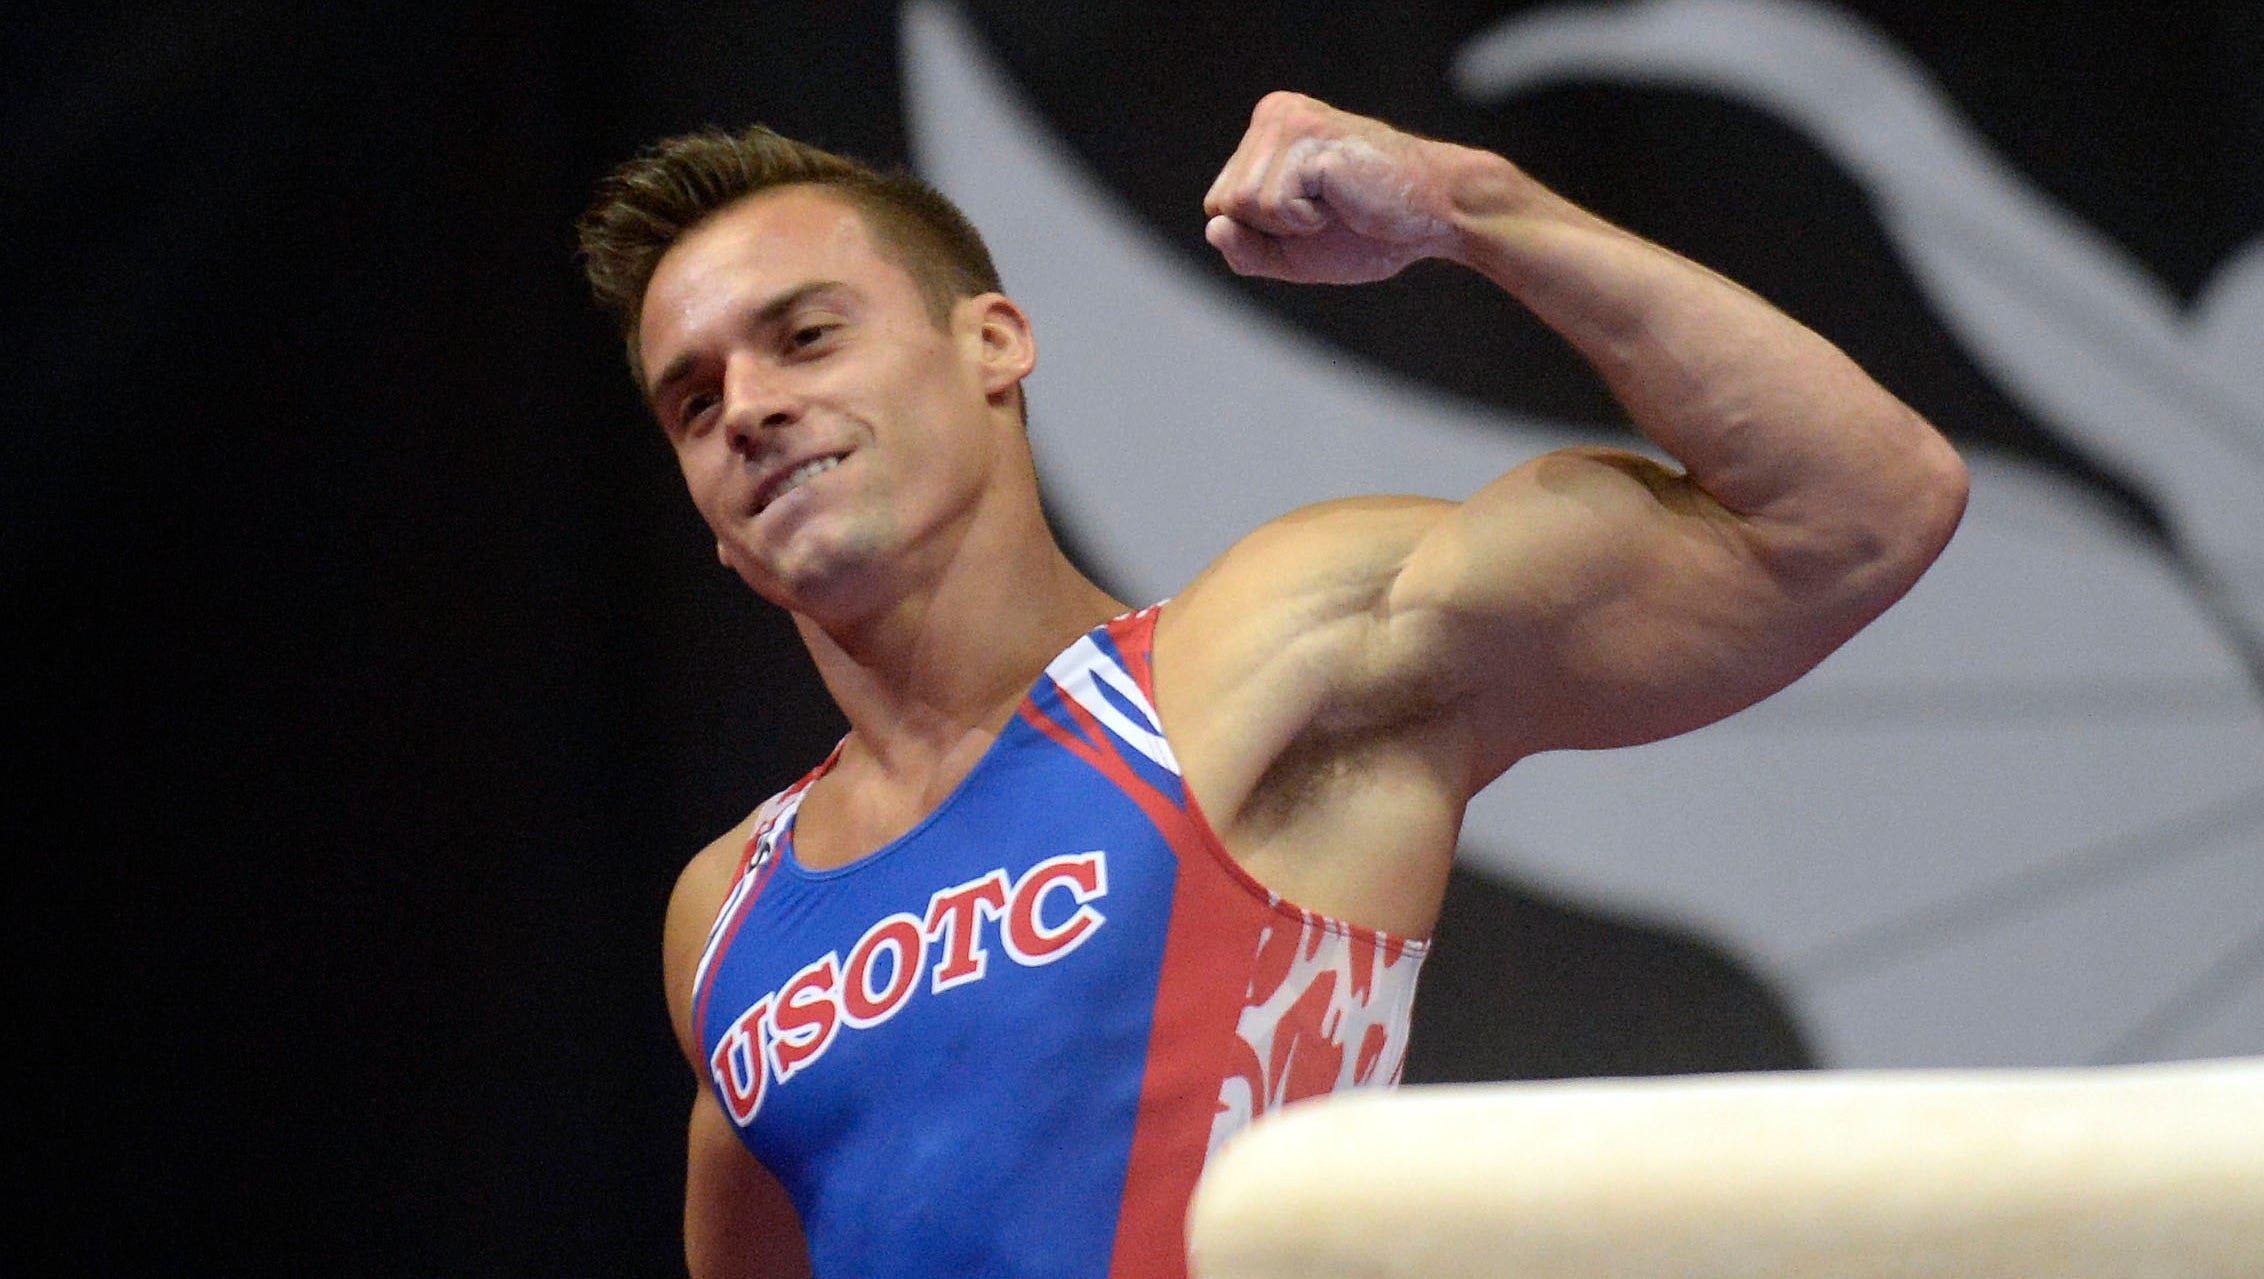 Sam Mikulak only competed in two events at the P&G Championships as he ...